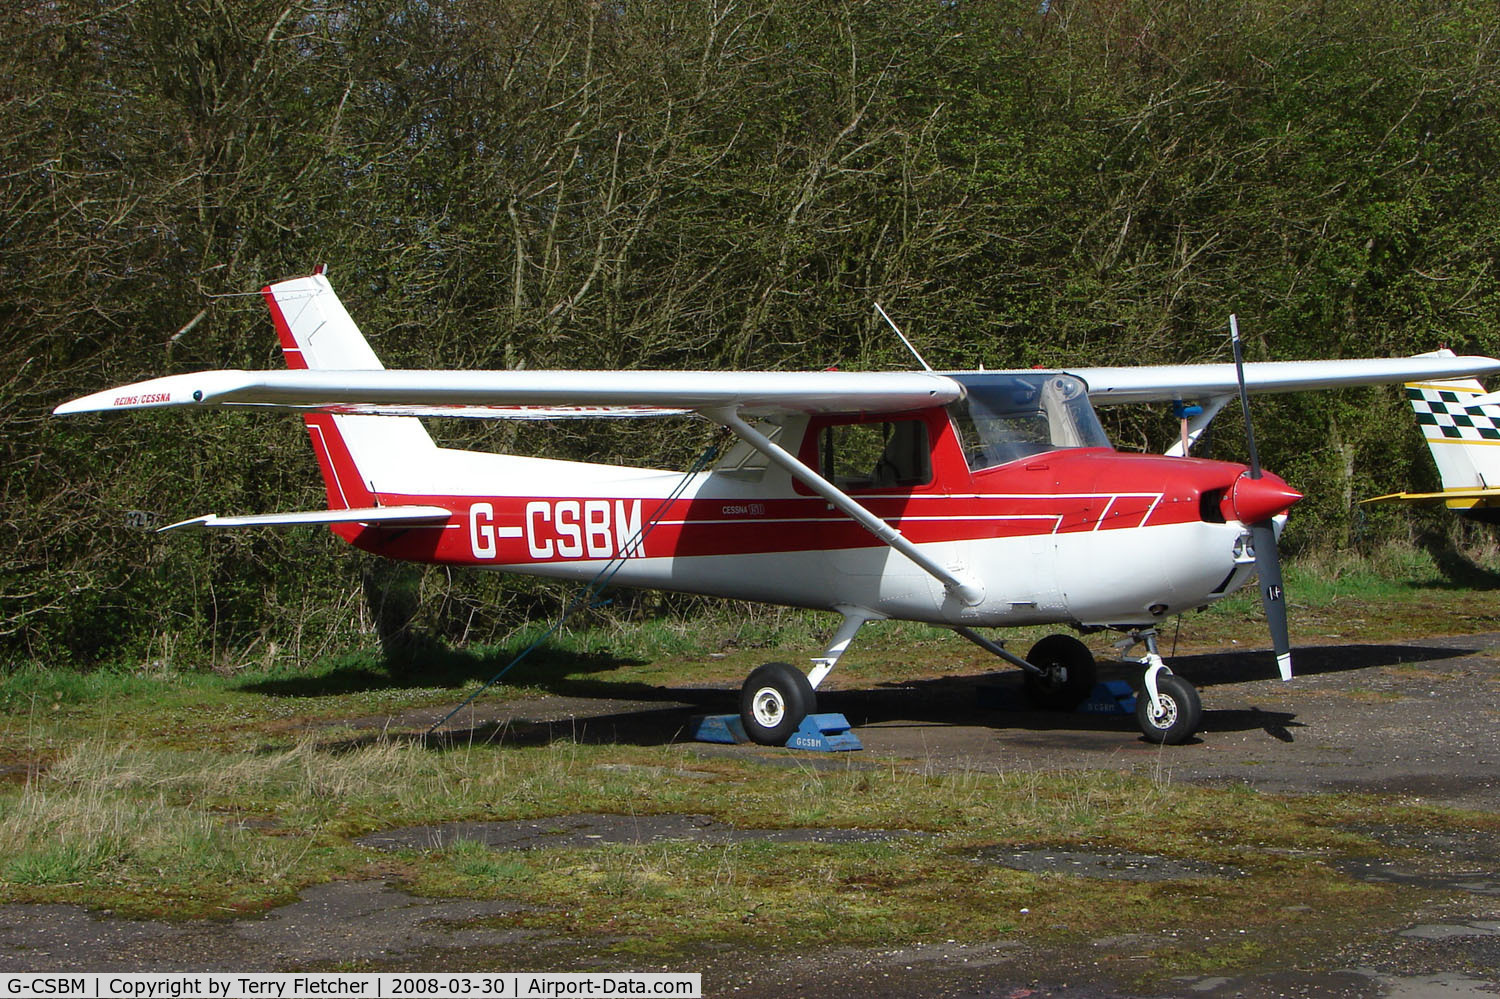 G-CSBM, 1977 Reims F150M C/N 1359, Based aircraft at the quaintly named Hinton-in-the-Hedges airfield